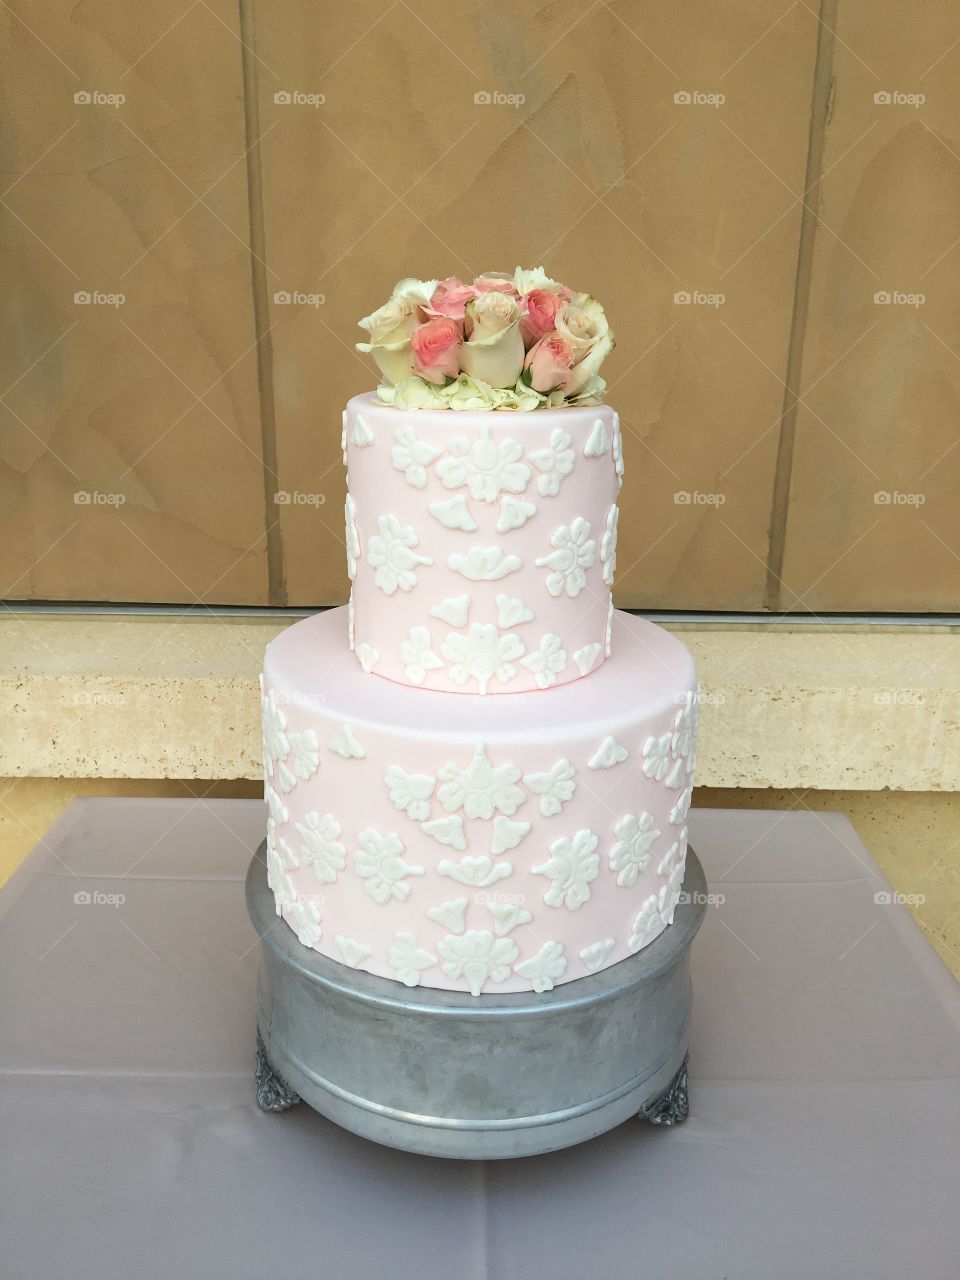 Stunning wedding cake! Simple two tiers oozing with style and class.